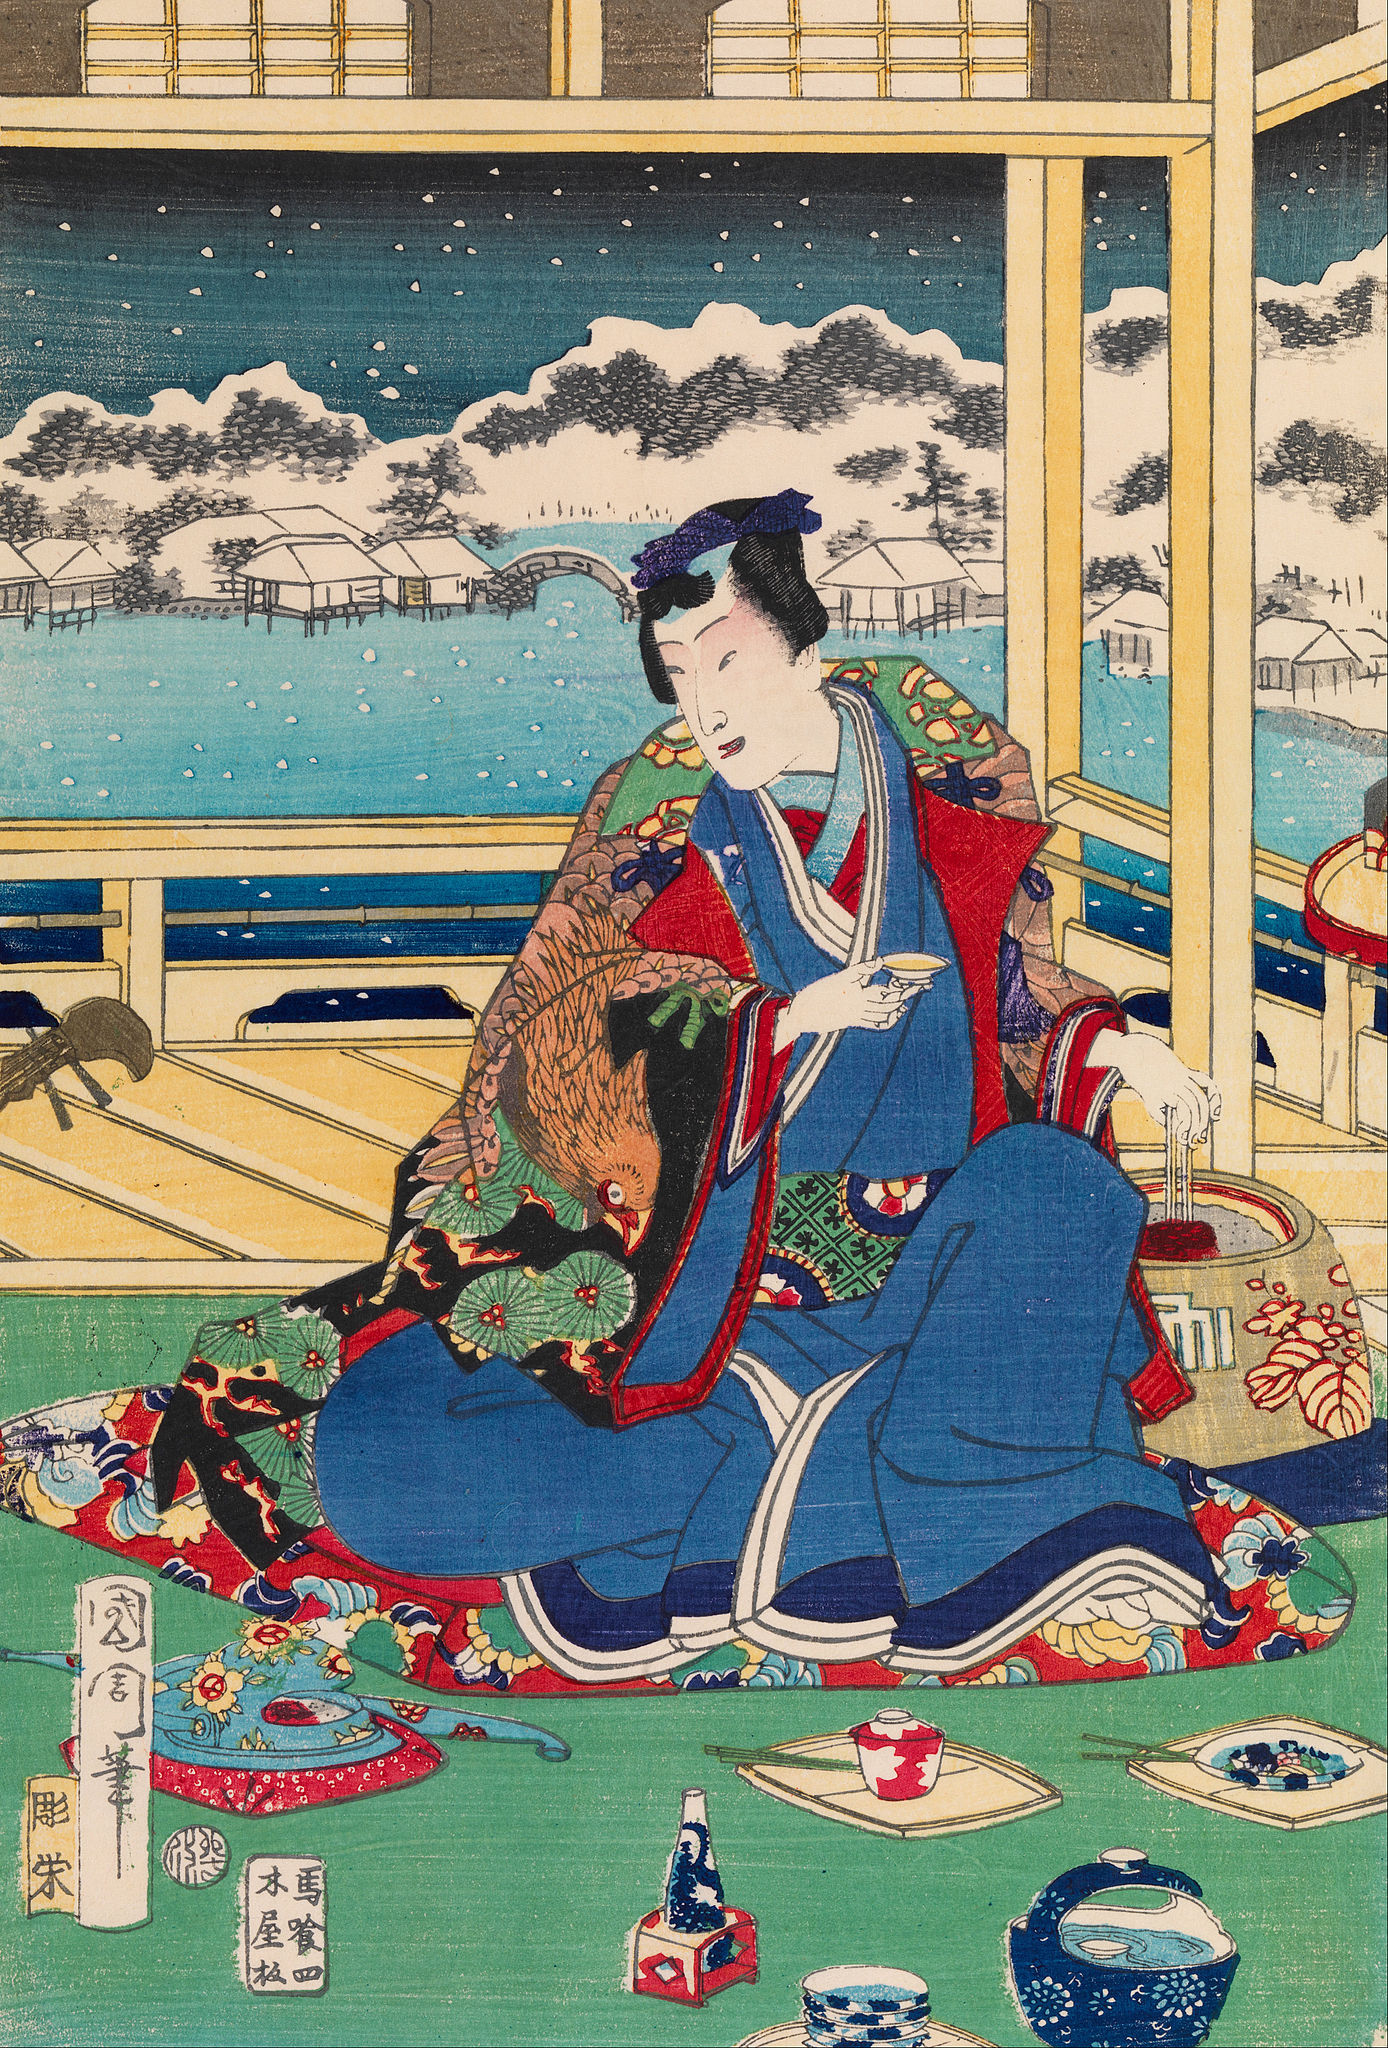 Genji Viewing Snow From a Balcony by Toyohara Kunichika - 1867 - 37 x 26 cm private collection